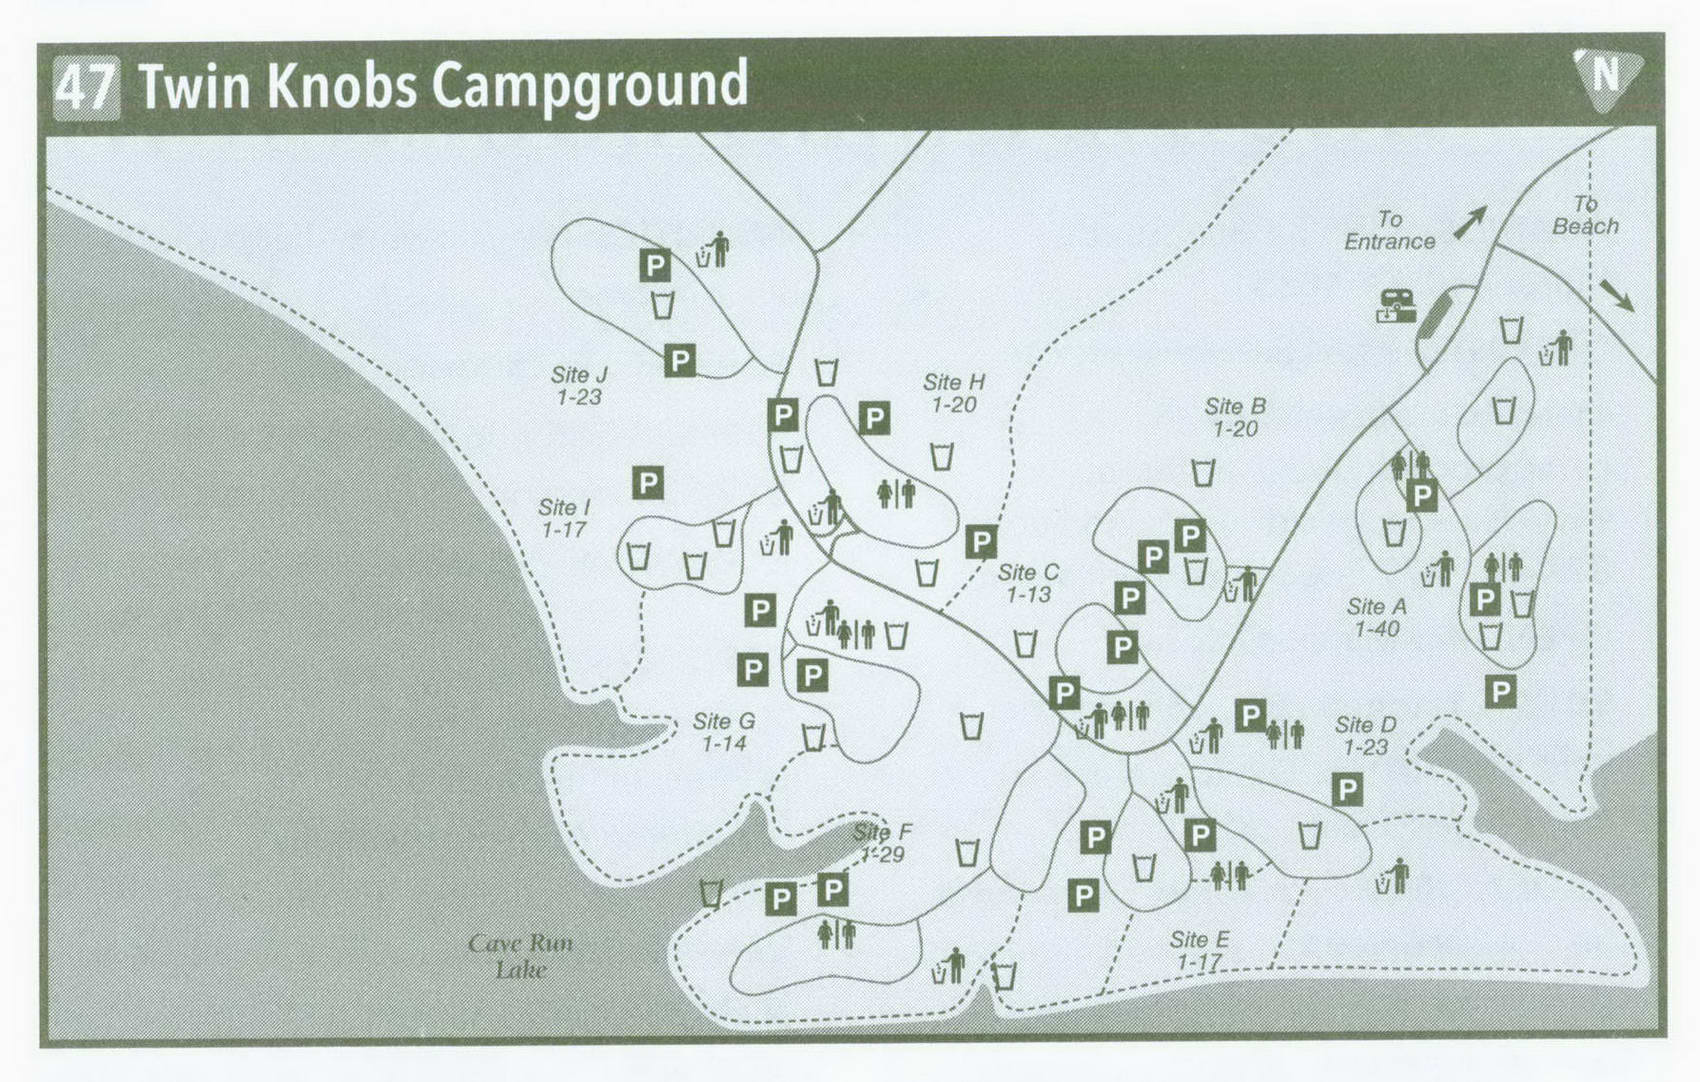 Twin Knobs Campground In Kentucky On Map Ky How To Get Information Us 3524